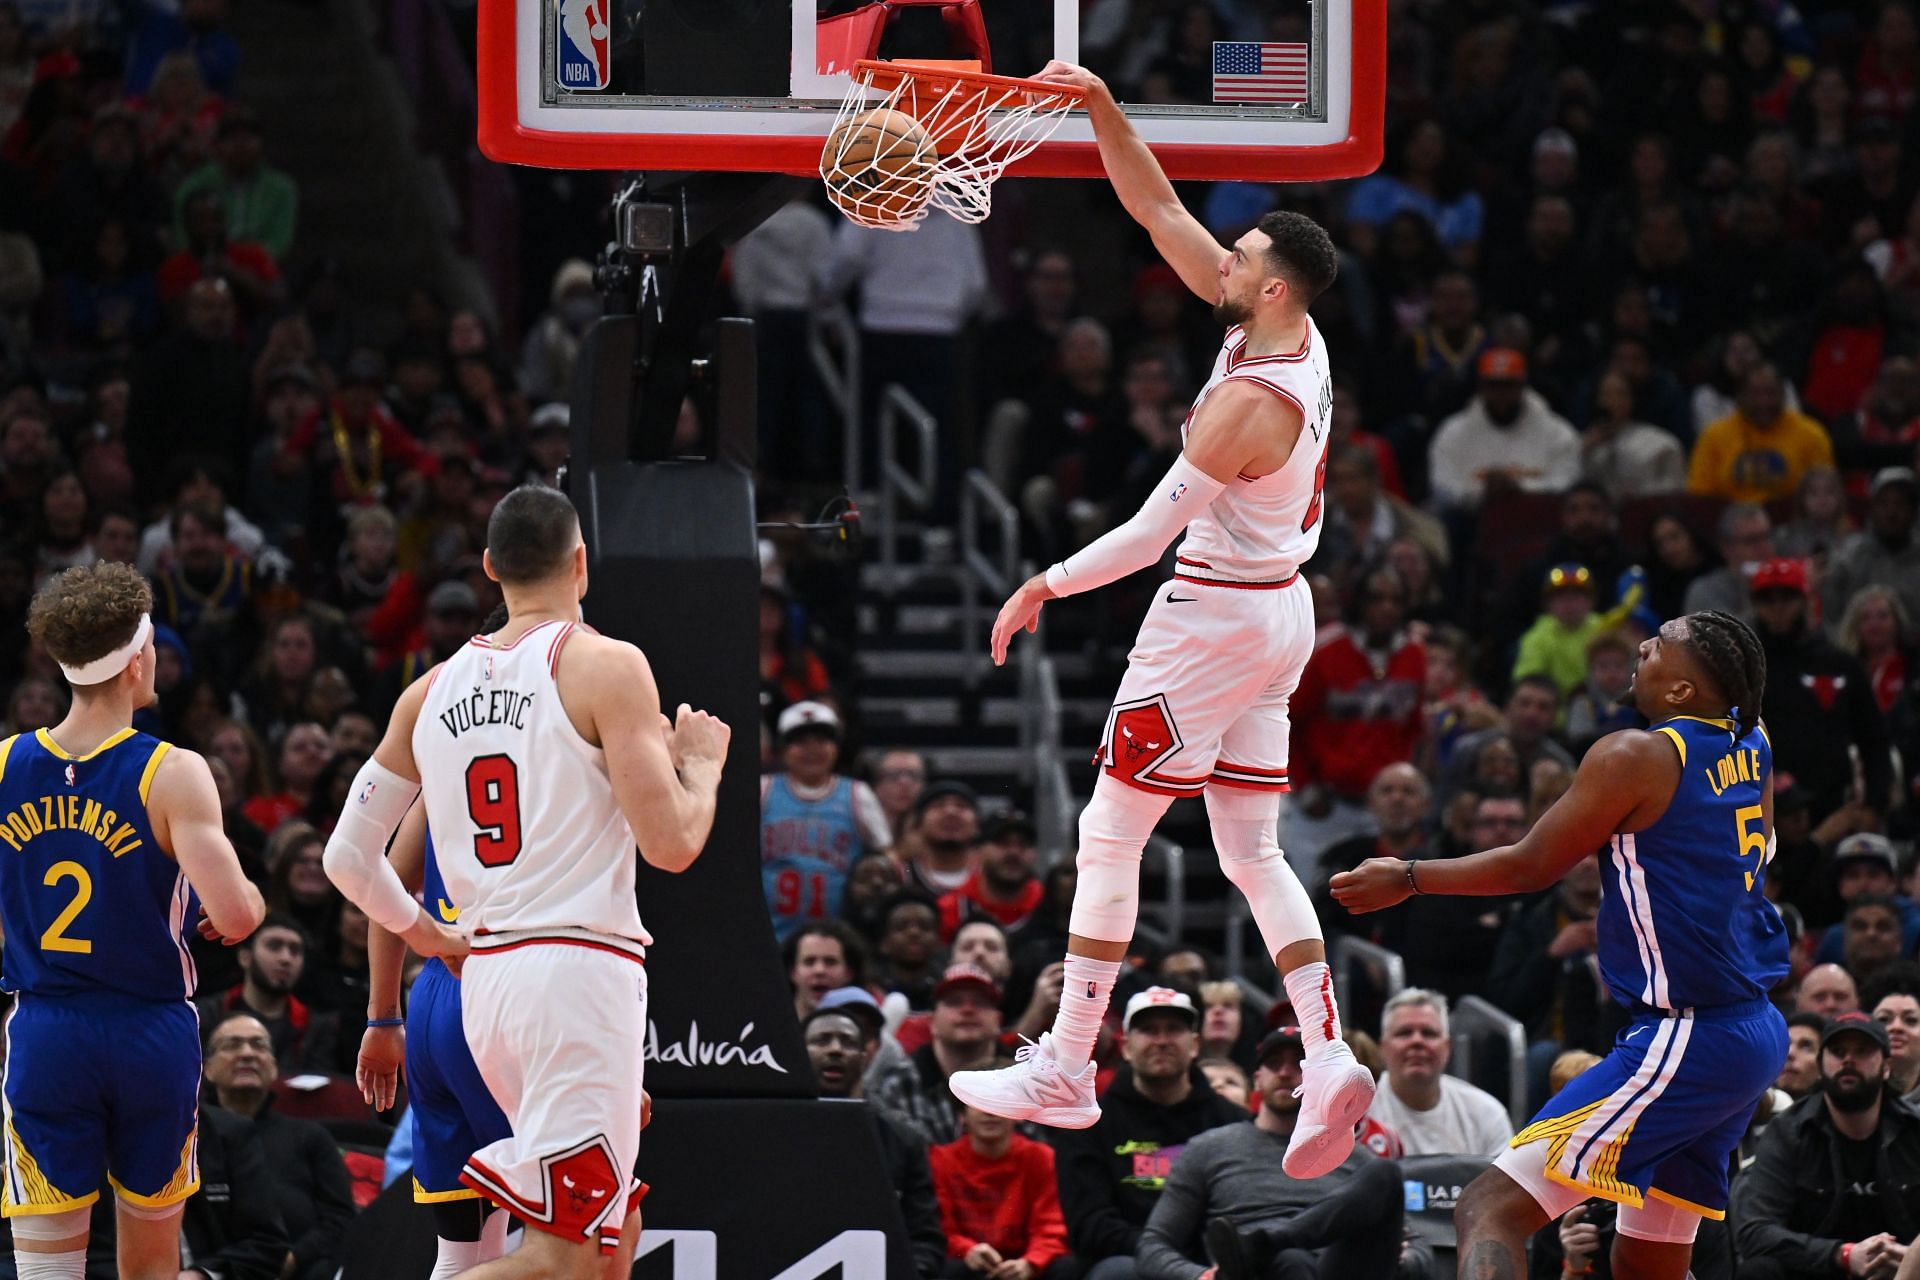 Former UCLA Bruin Zach LaVine has a 41-inch vertical leap. He currently plays for the Chicago Bulls.